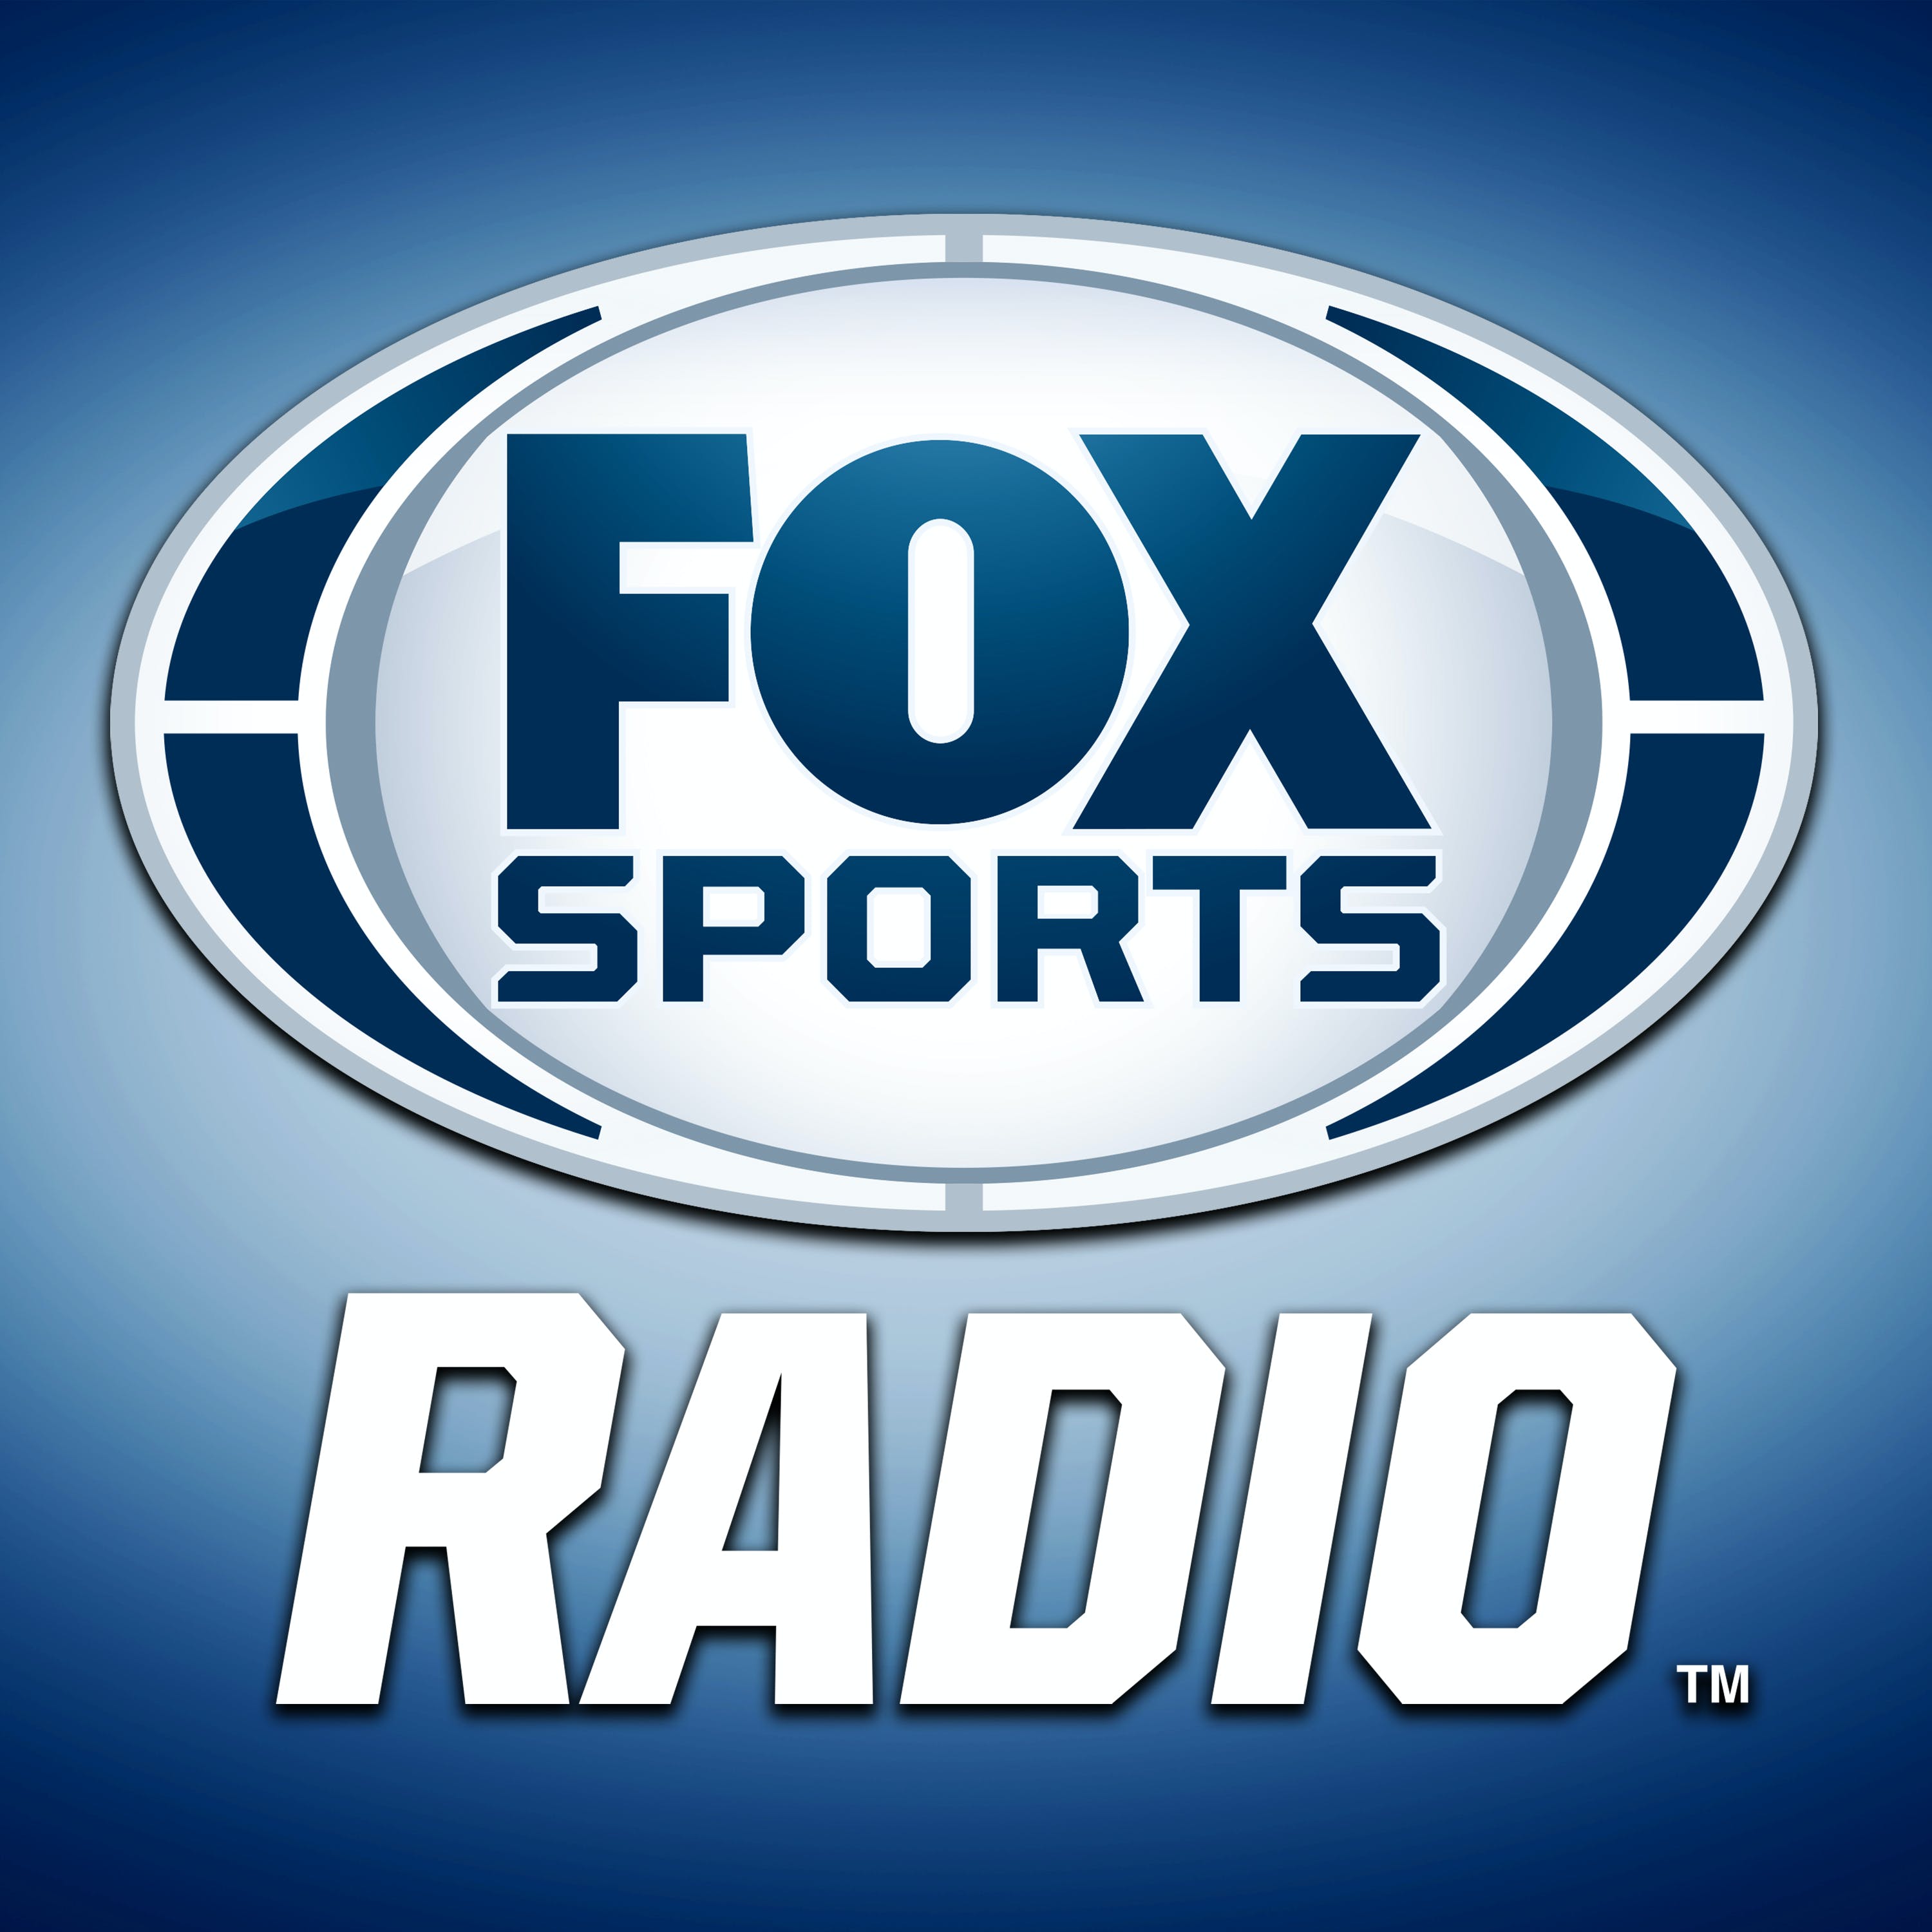 The Bernie Fratto Show talks MLB Playoffs, Stanford @ Boulder, and much more!